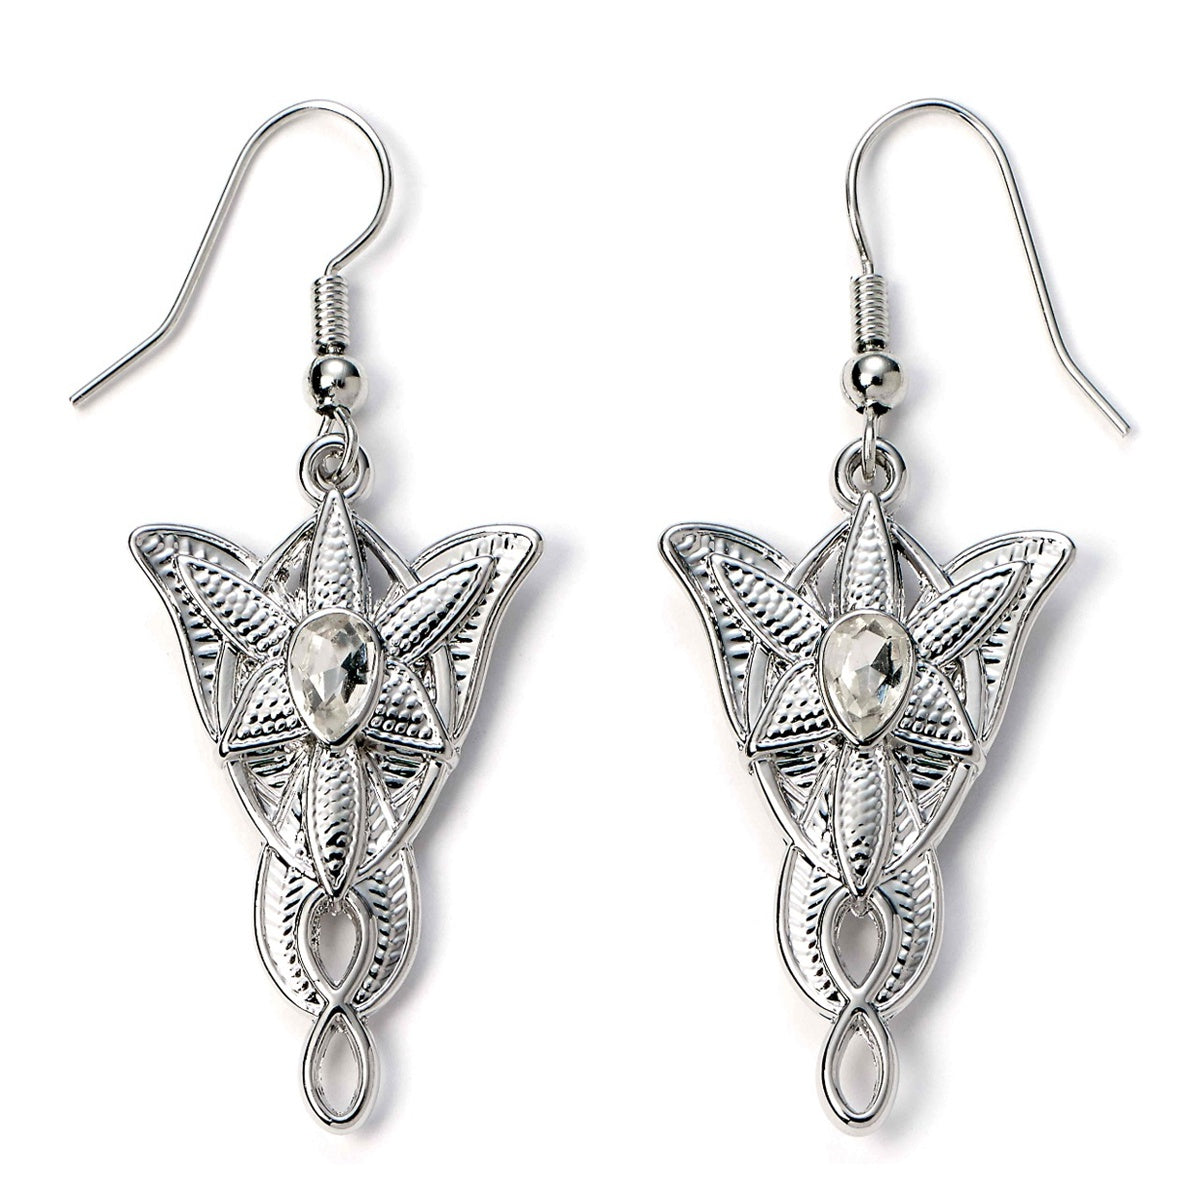 The Lord of The Rings Evenstar Earrings